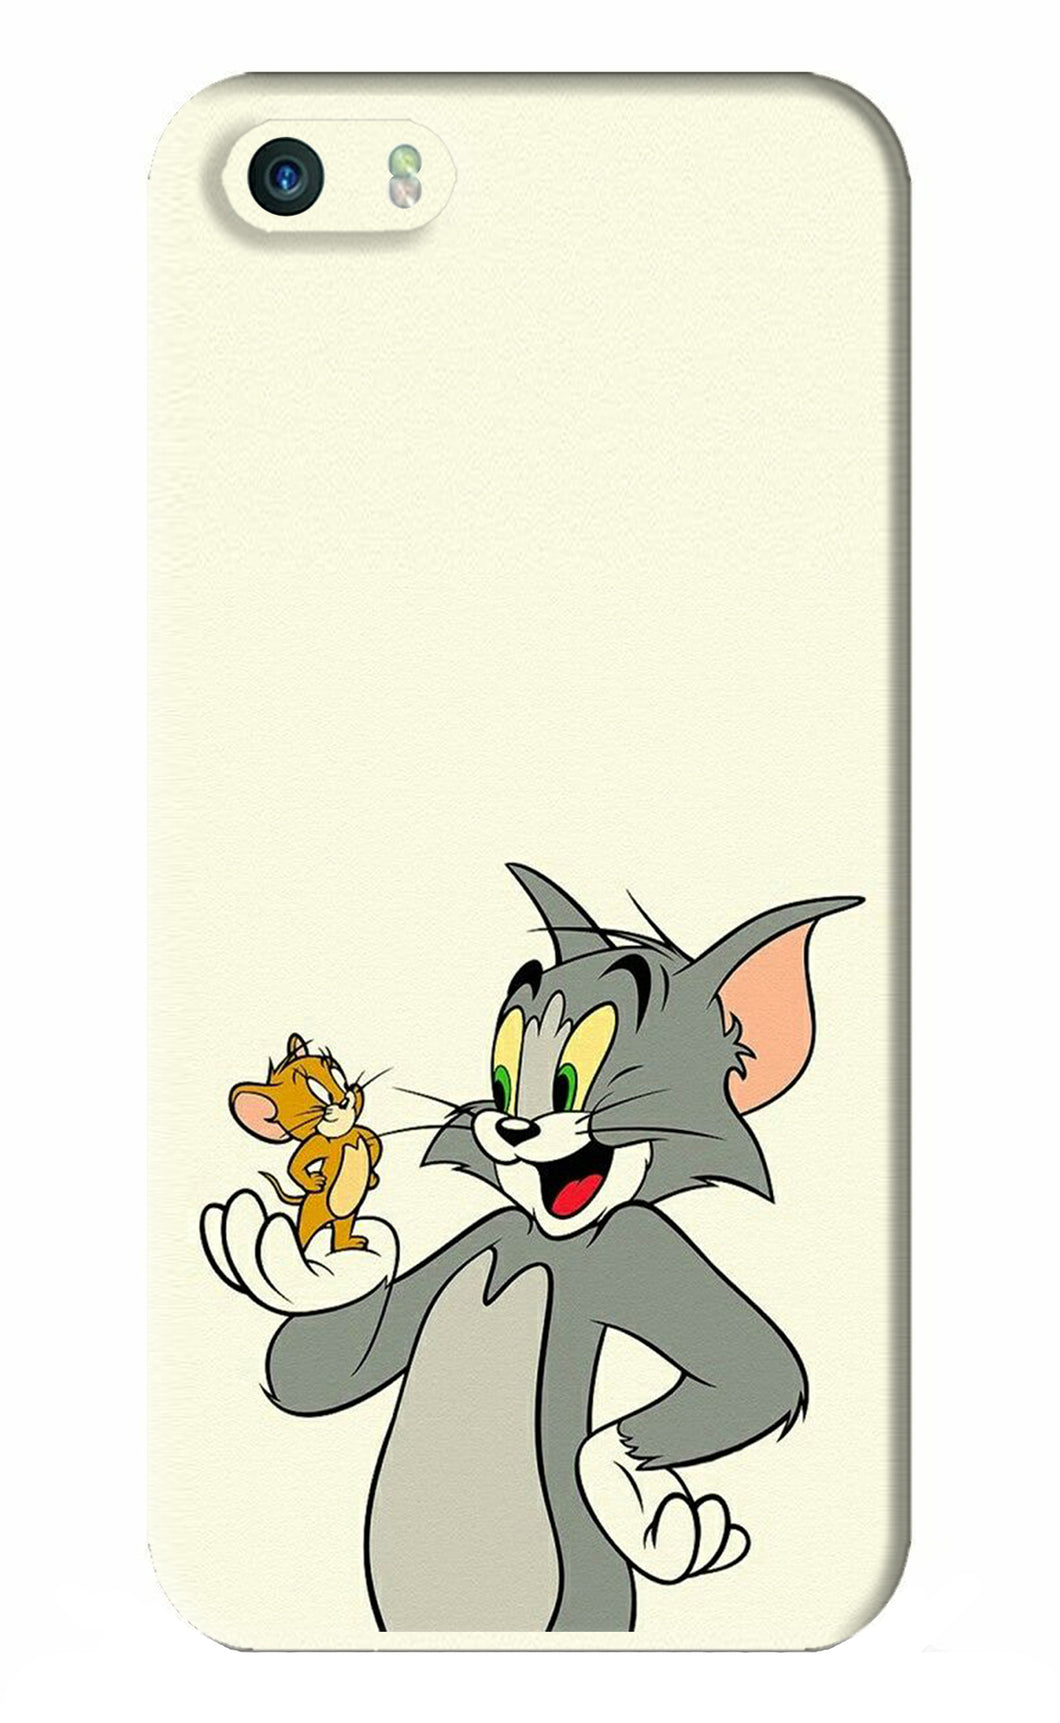 Tom & Jerry iPhone 5S Back Skin Wrap